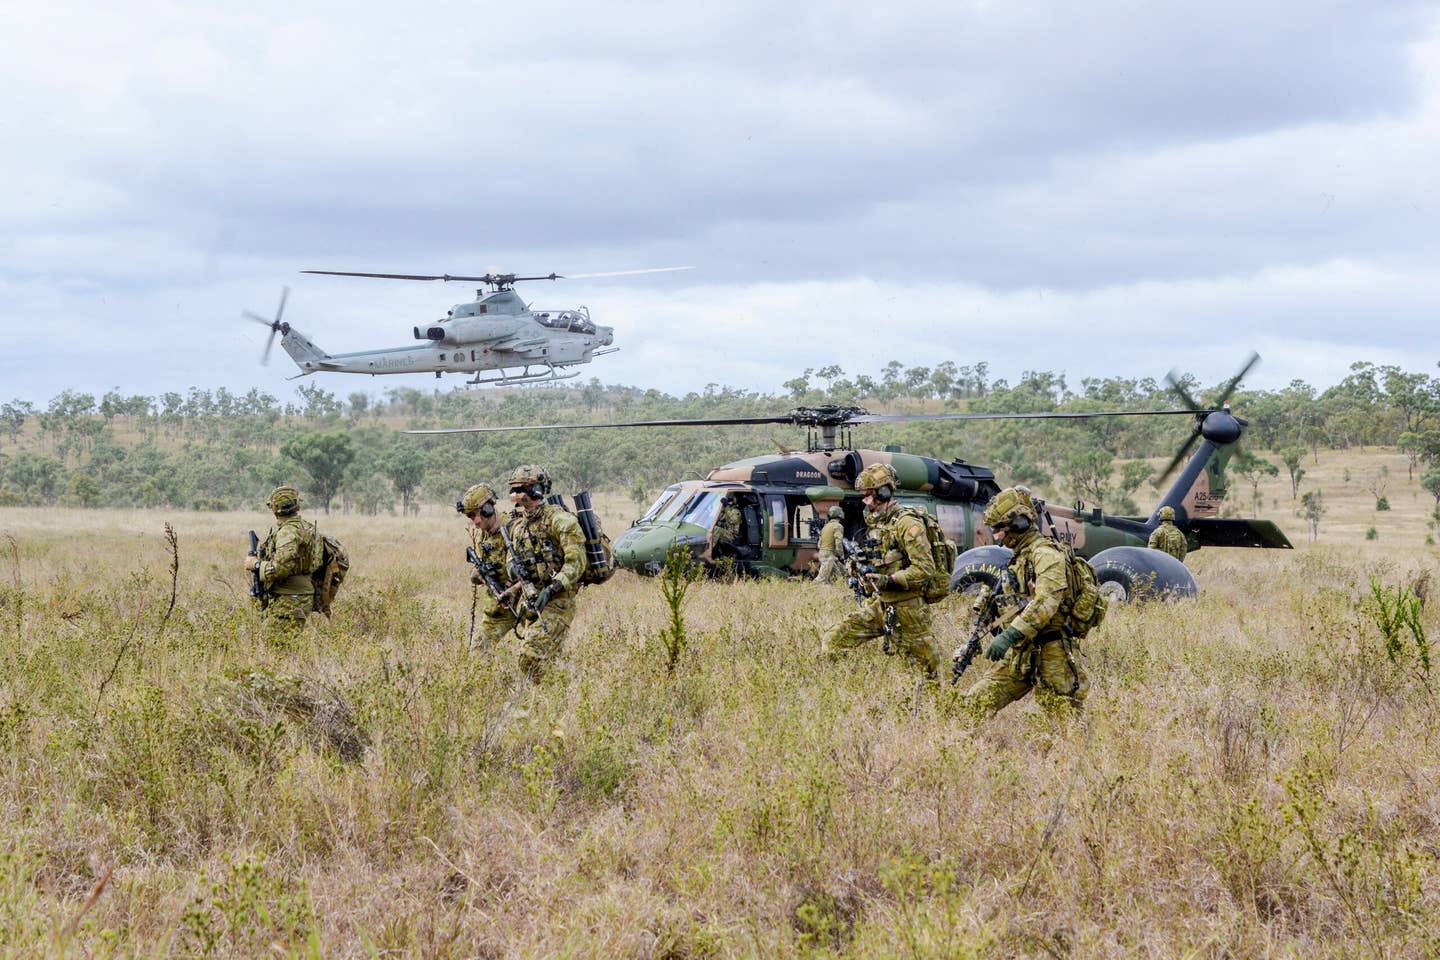 Australian Army soldiers from the 2nd Commando Regiment disembark a 6th Aviation Regiment S-70A-9 Black Hawk at the High Range training area near Townsville, Queensland, during joint training with U.S. Marine Corps AH-1Z Viper gunships as part of Exercise Talisman Sabre 2019. <em>COMMONWEALTH OF AUSTRALIA, DEPARTMENT OF DEFENSE</em>